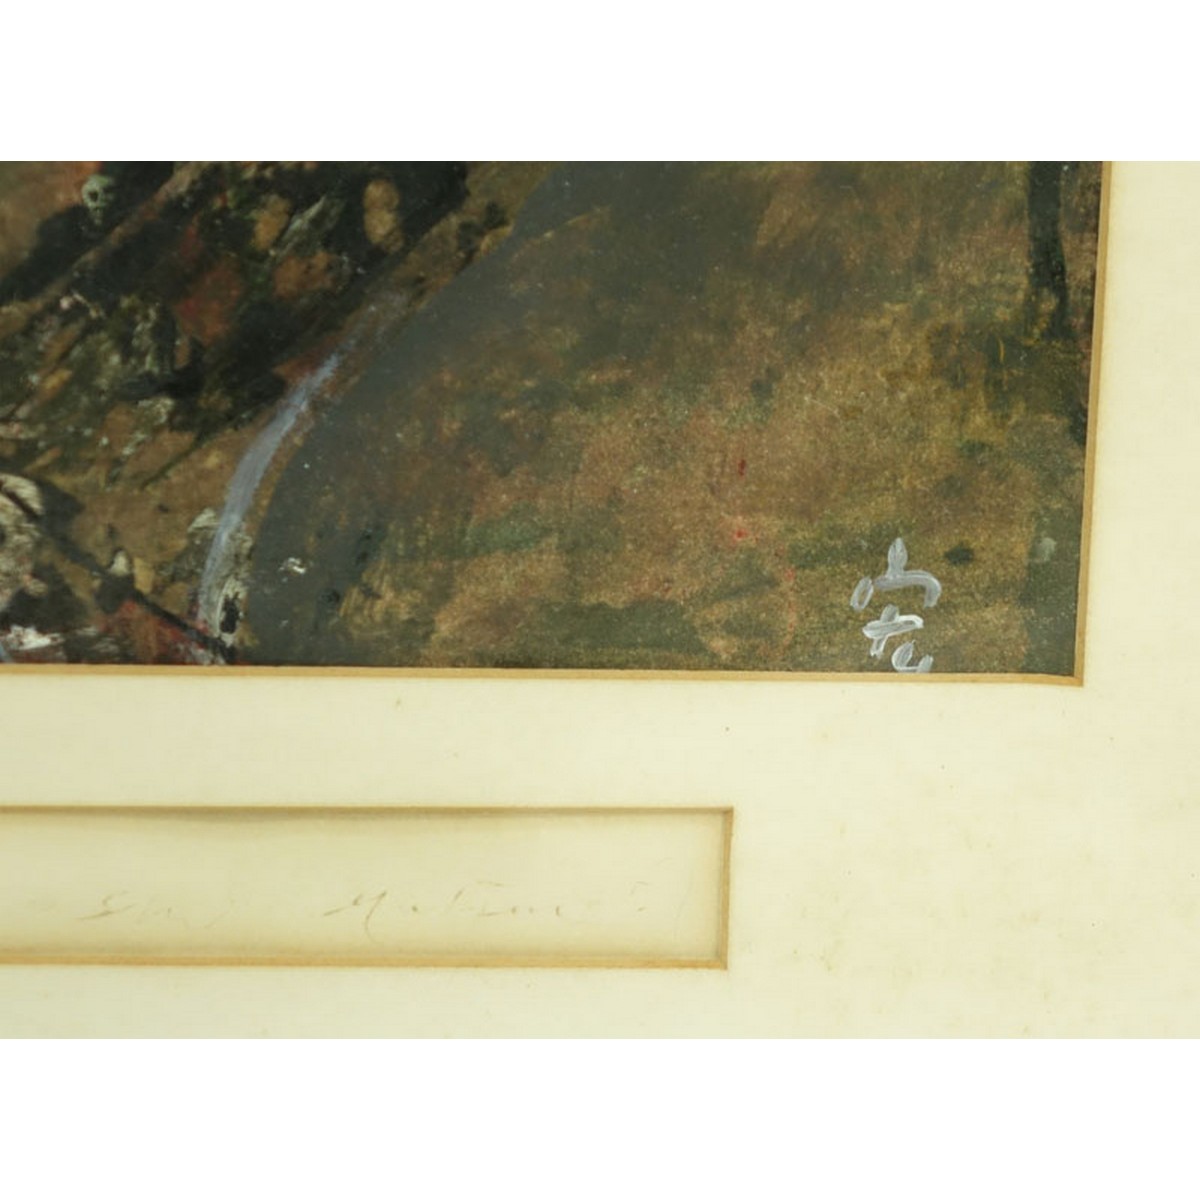 20th Century Chinese Gouache on Paper, Abstract Composition, Signed Lower Right. Inscribed at the opening on the matting.